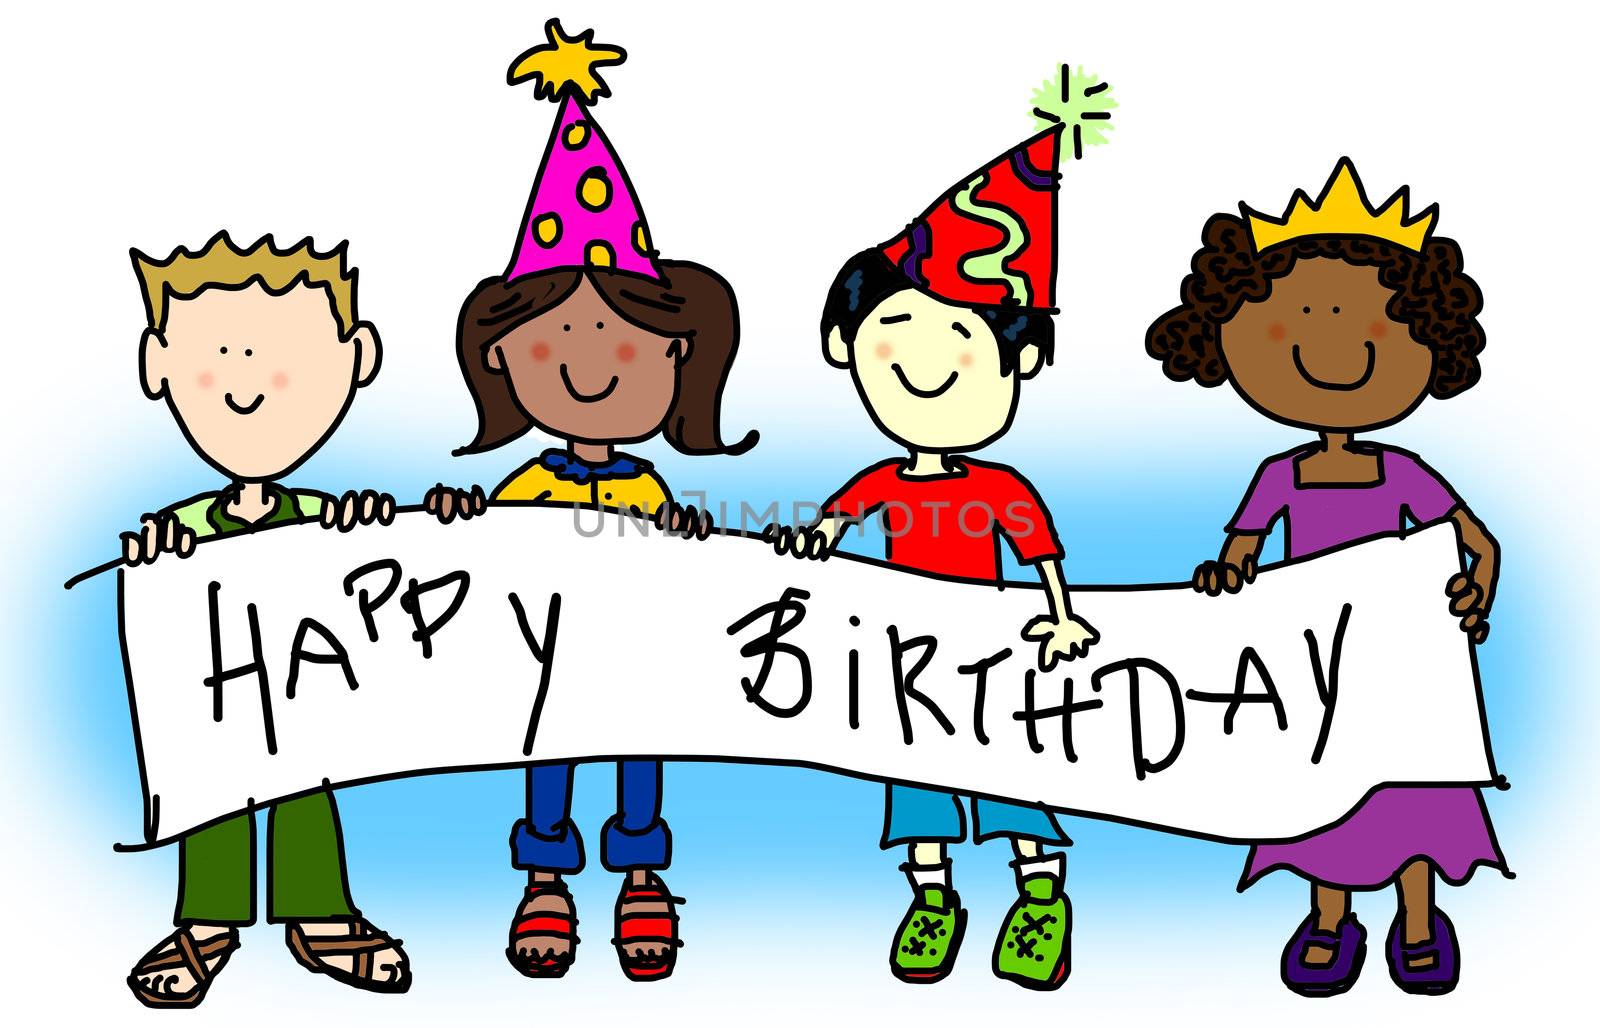 Large childlike cartoon characters: little kids, boys and girls, holding a very big blank banner and wearing party hats.